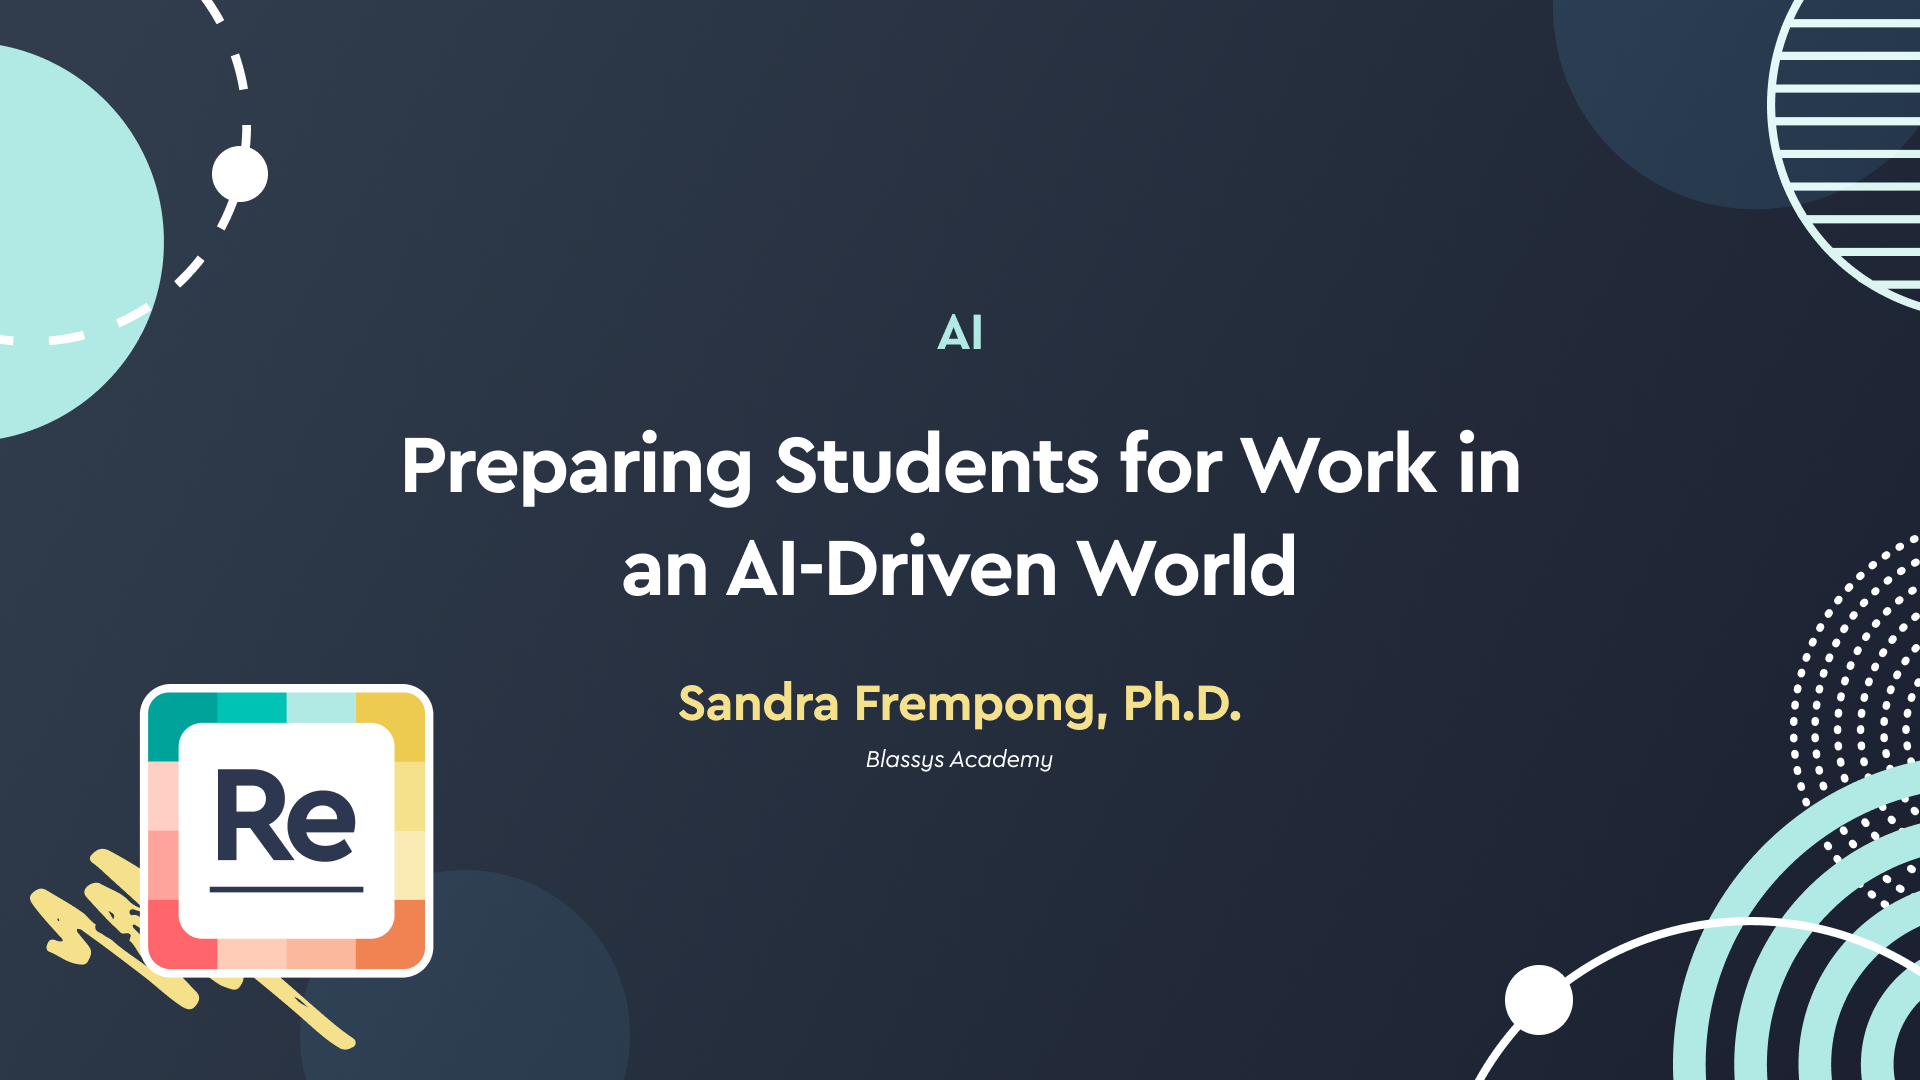 Preparing Students for Work in an AI-Driven World